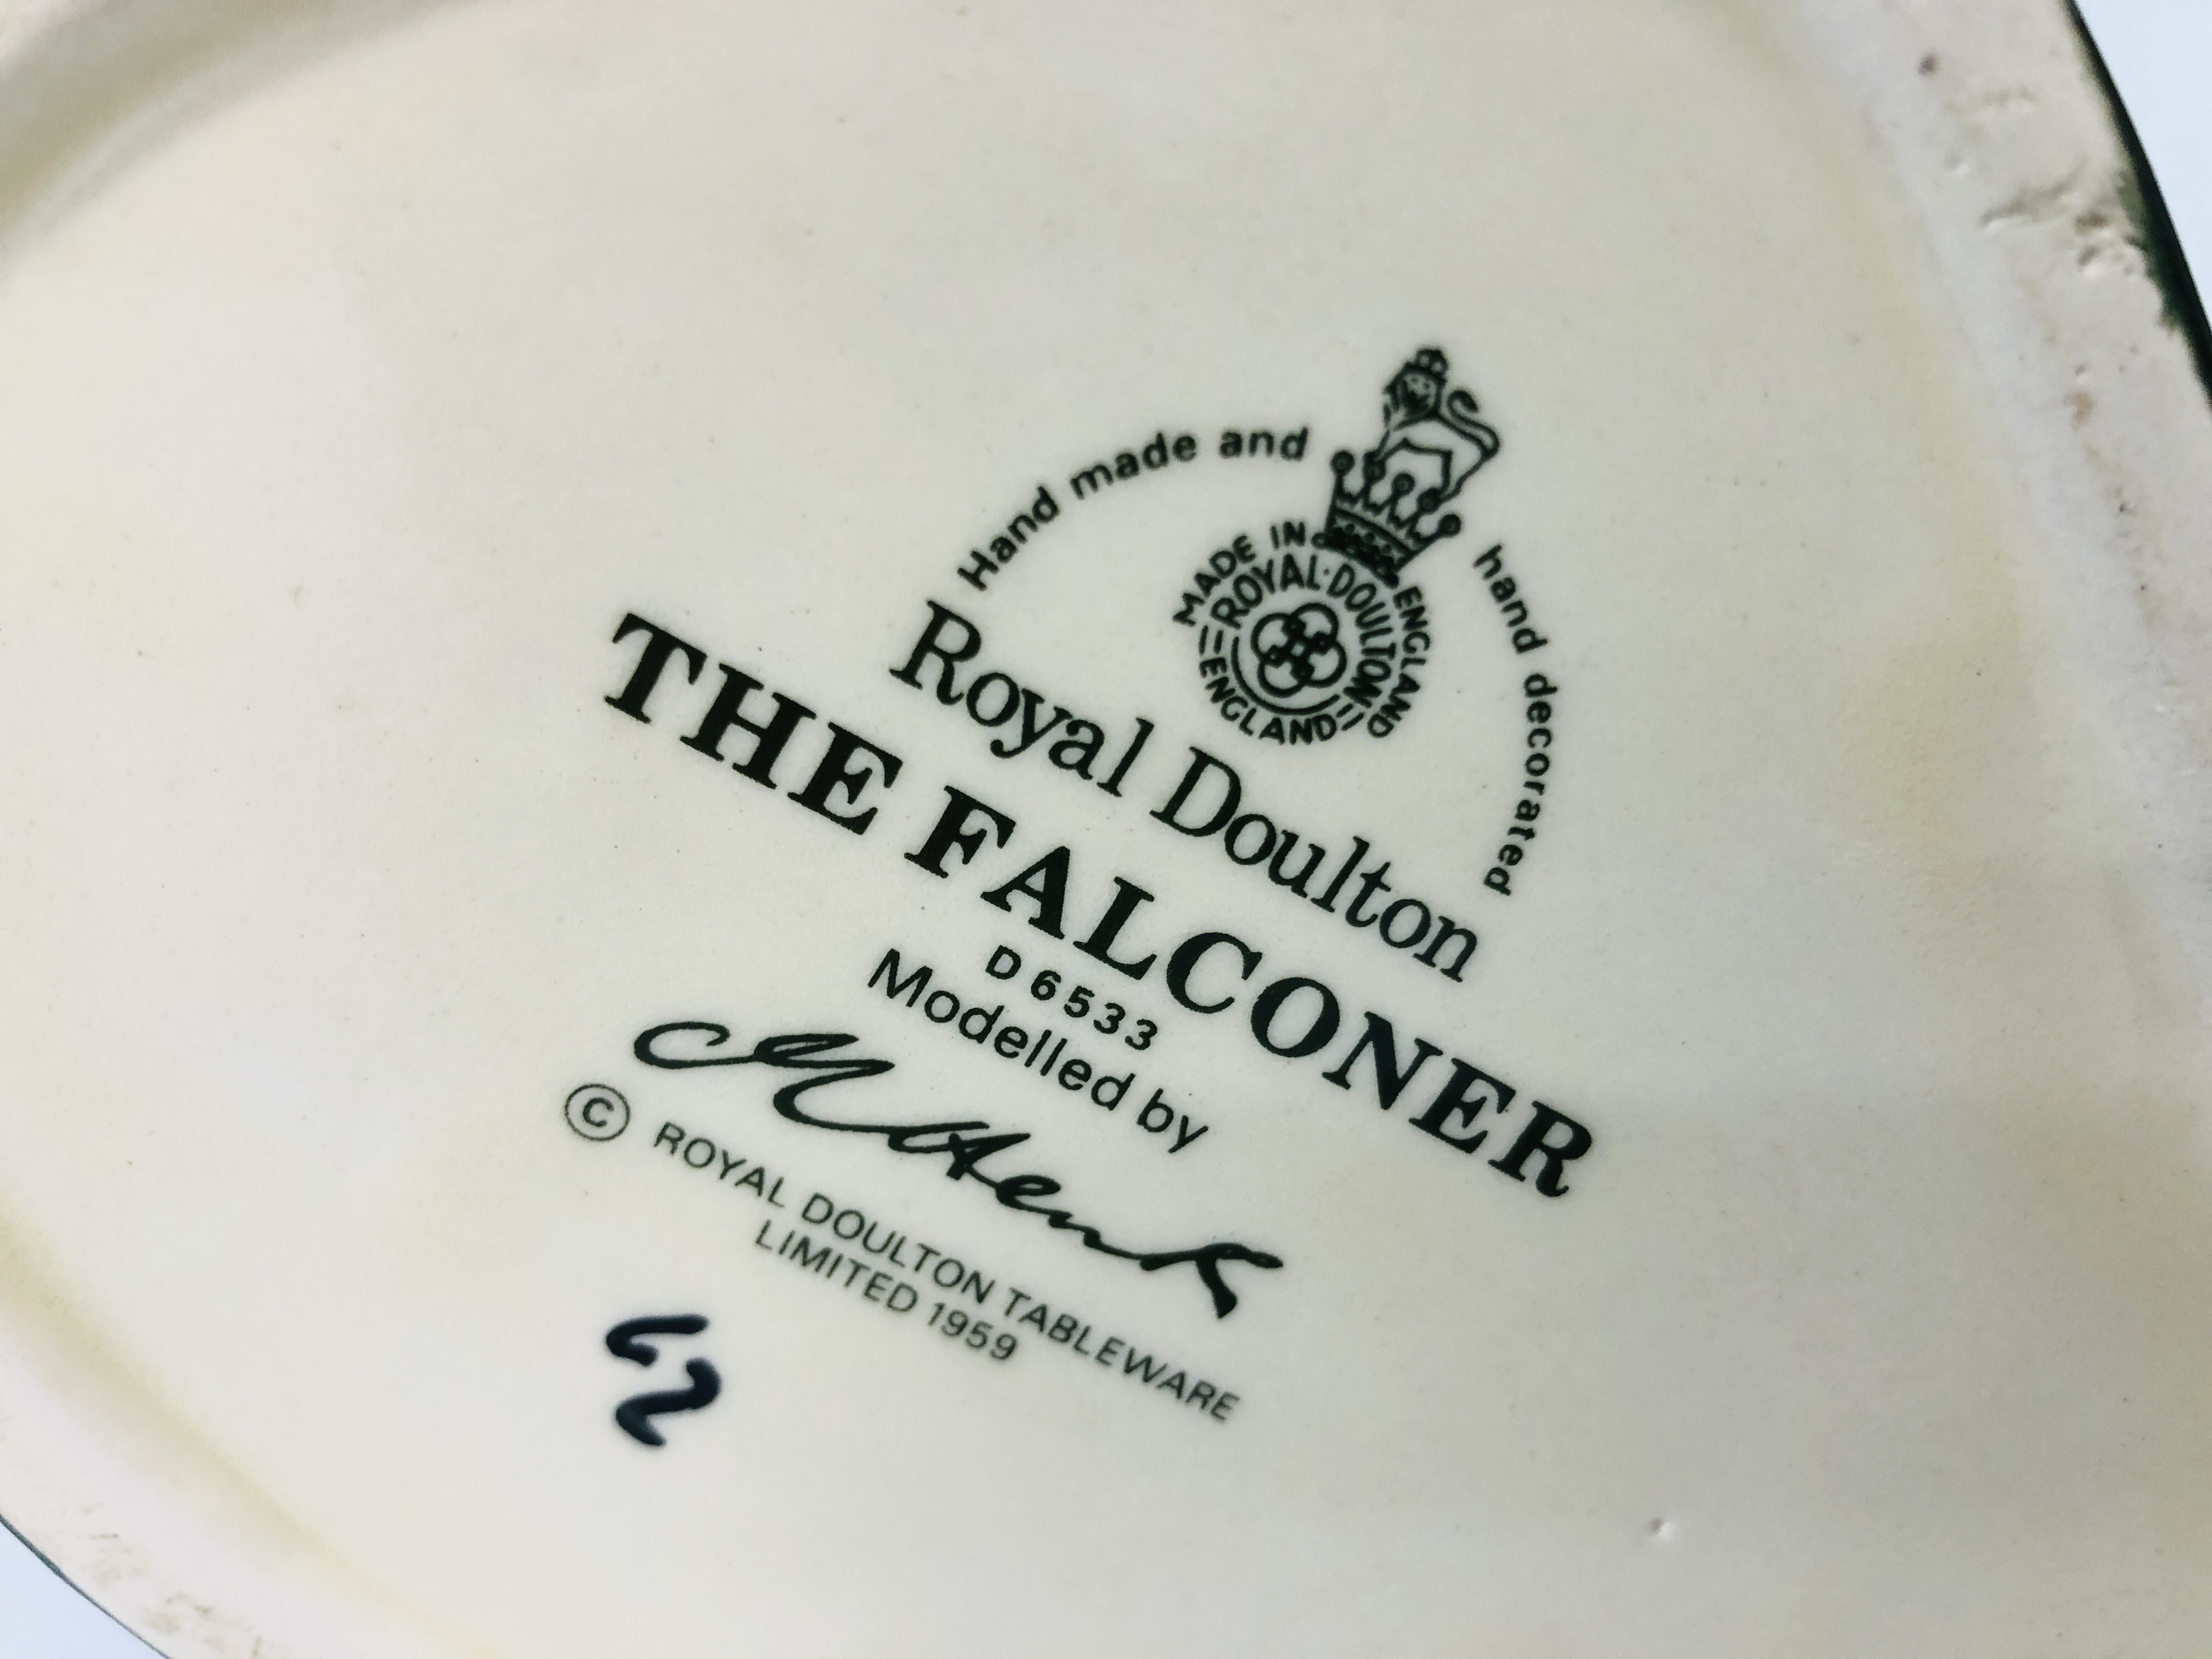 3 X ROYAL DOULTON CHARACTER JUGS TO INCLUDE "THE POACHER" - D 6429, THE FALCONER D 6533, - Image 7 of 8